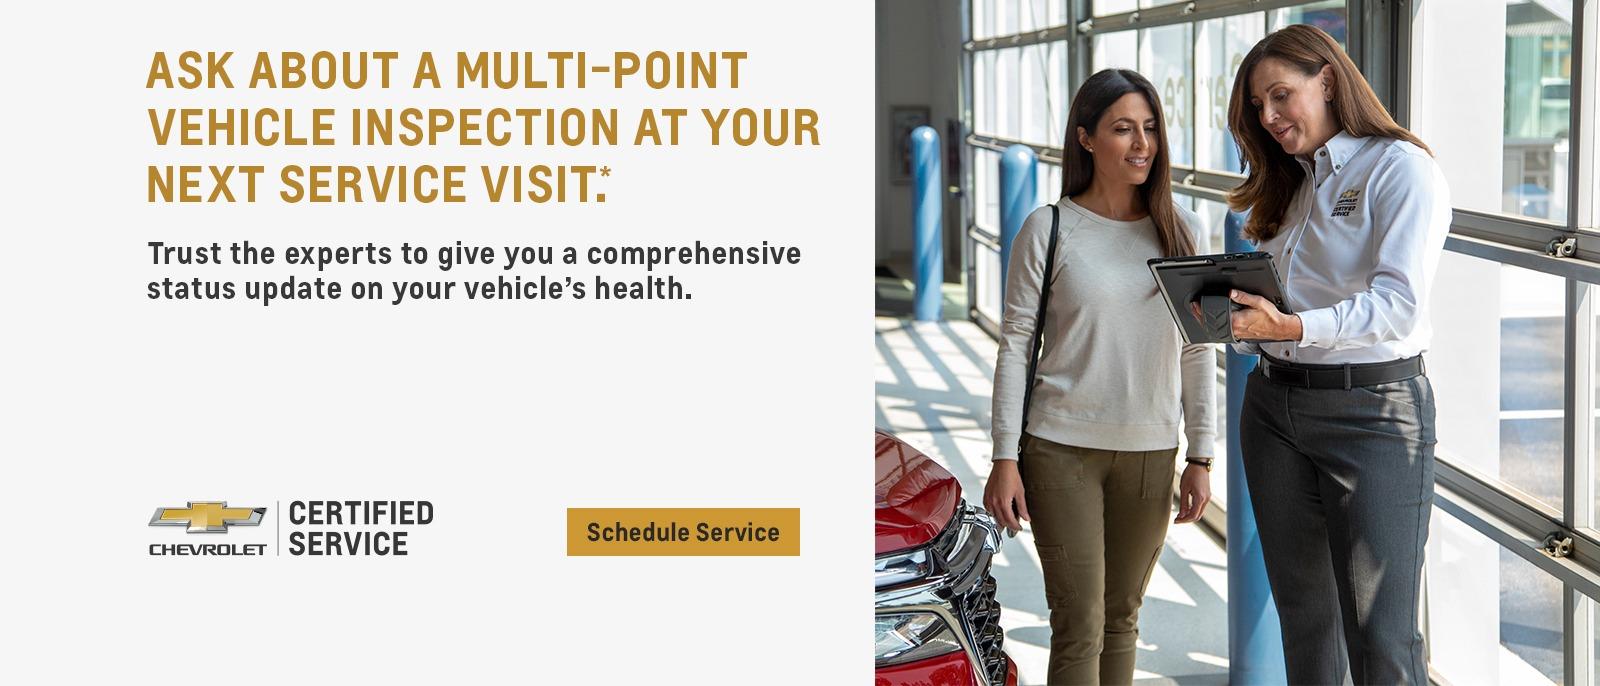 Ask about a multi-point vehicle inspection at your next service visit.Trust the experts to give you a comprehensive status update on your vehicle's health.